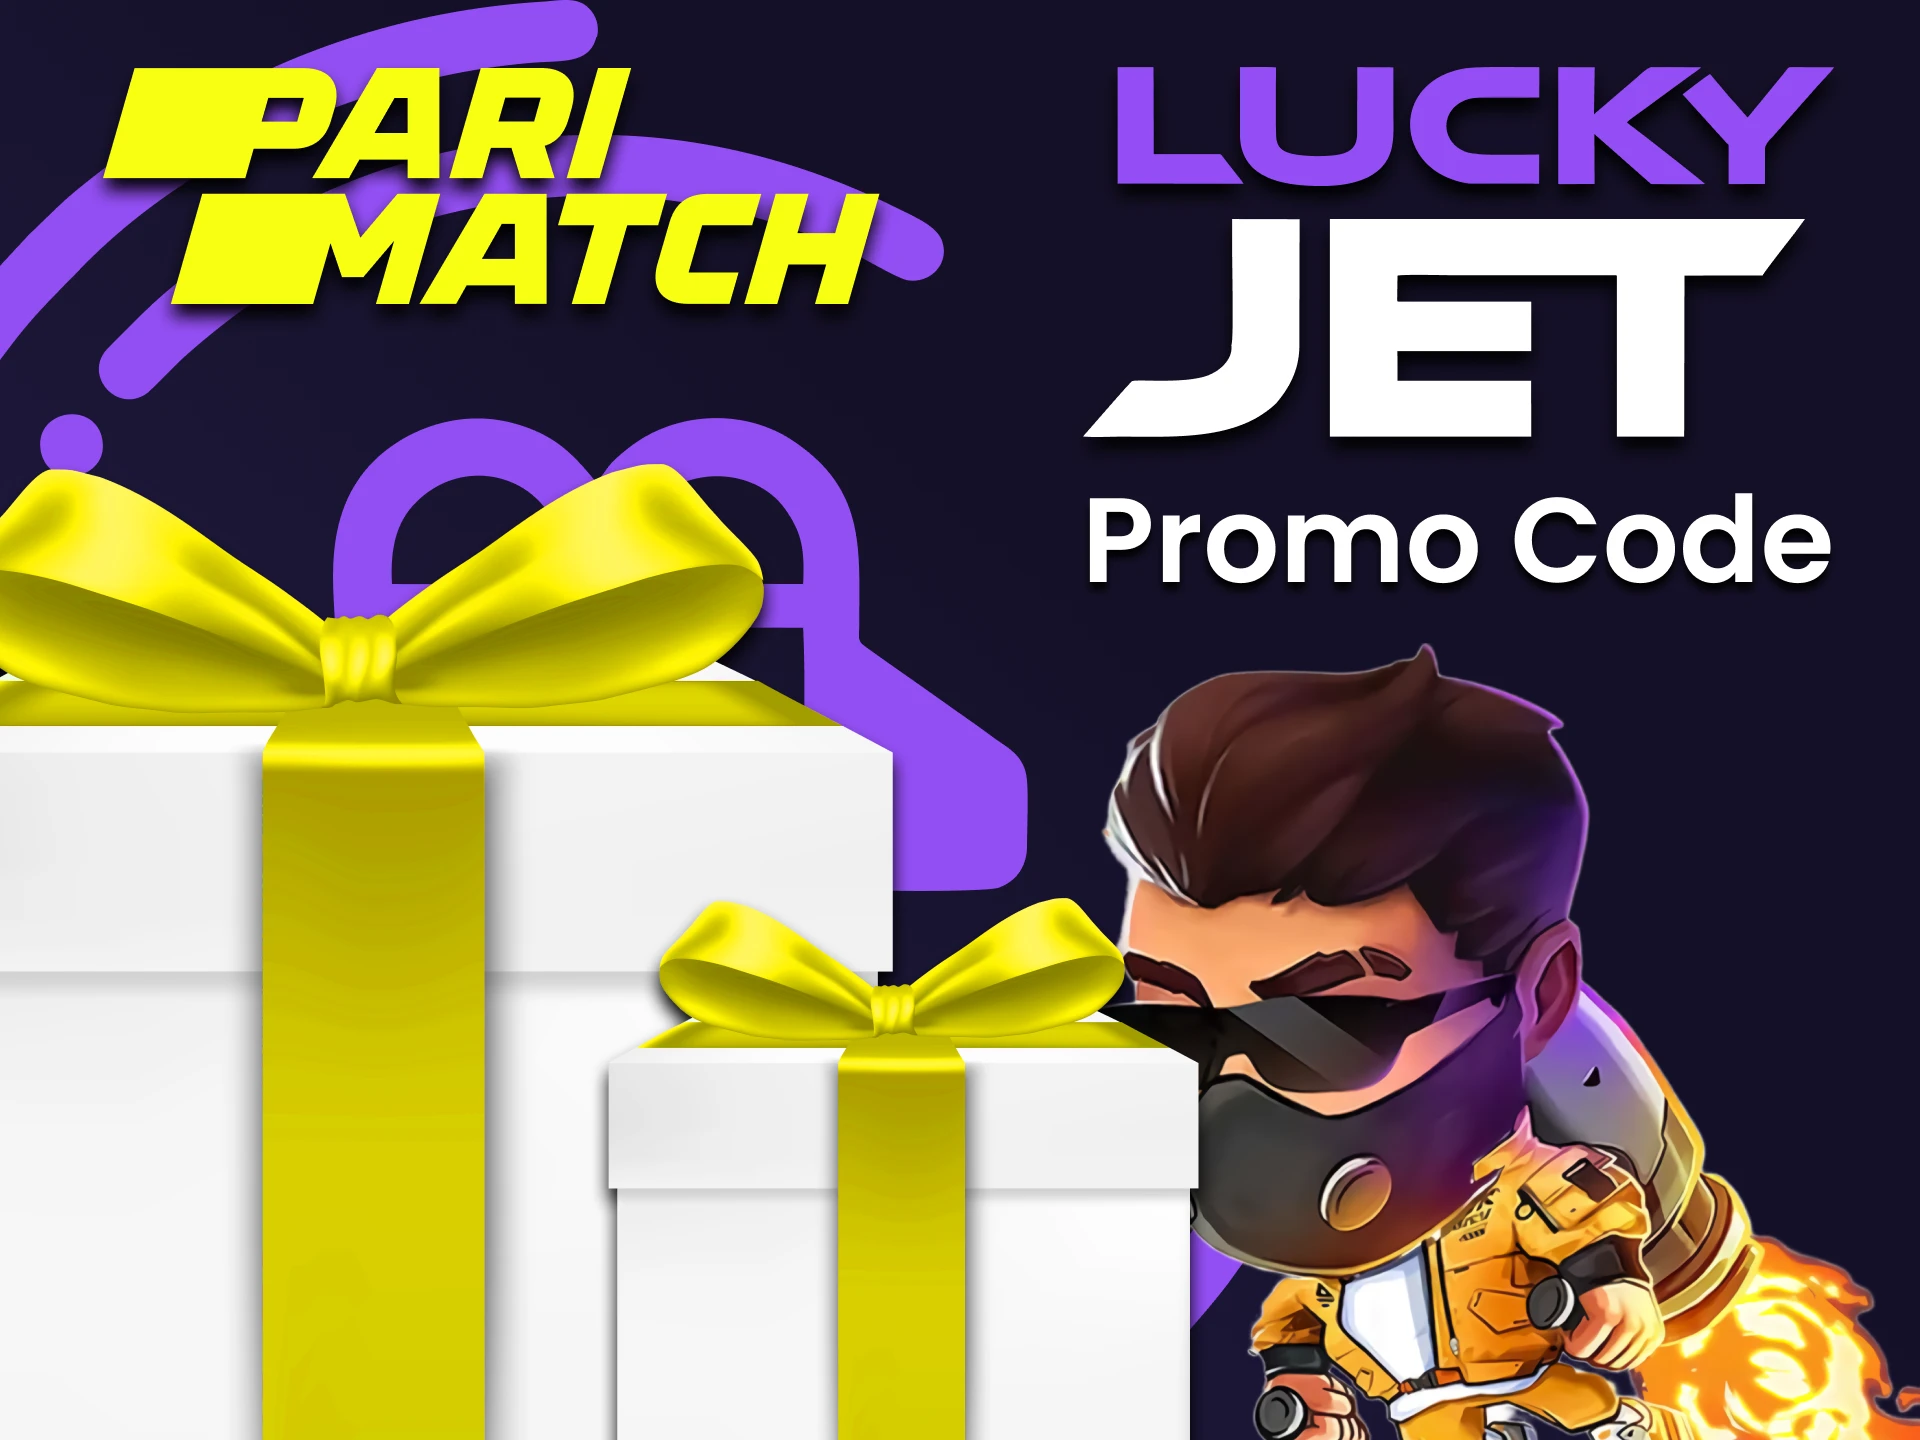 Get a promo code for Lucky Jet from Parimatch.